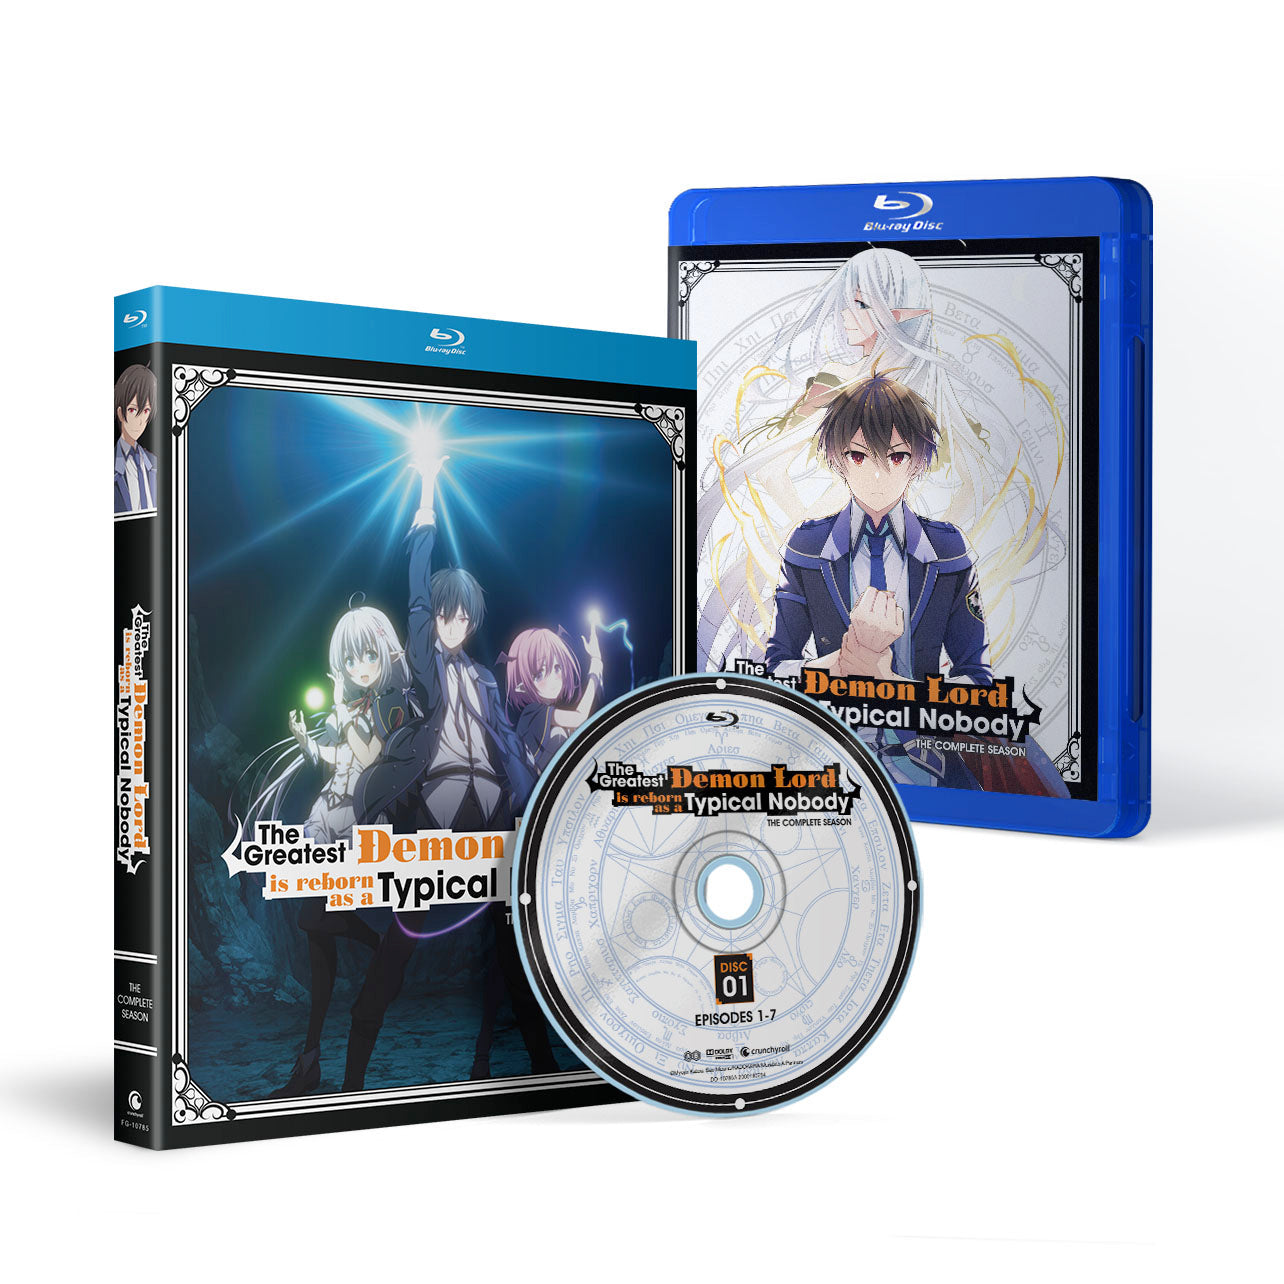 The Greatest Demon Lord is Reborn as a Typical Nobody - The Complete Season - Blu-Ray image count 0